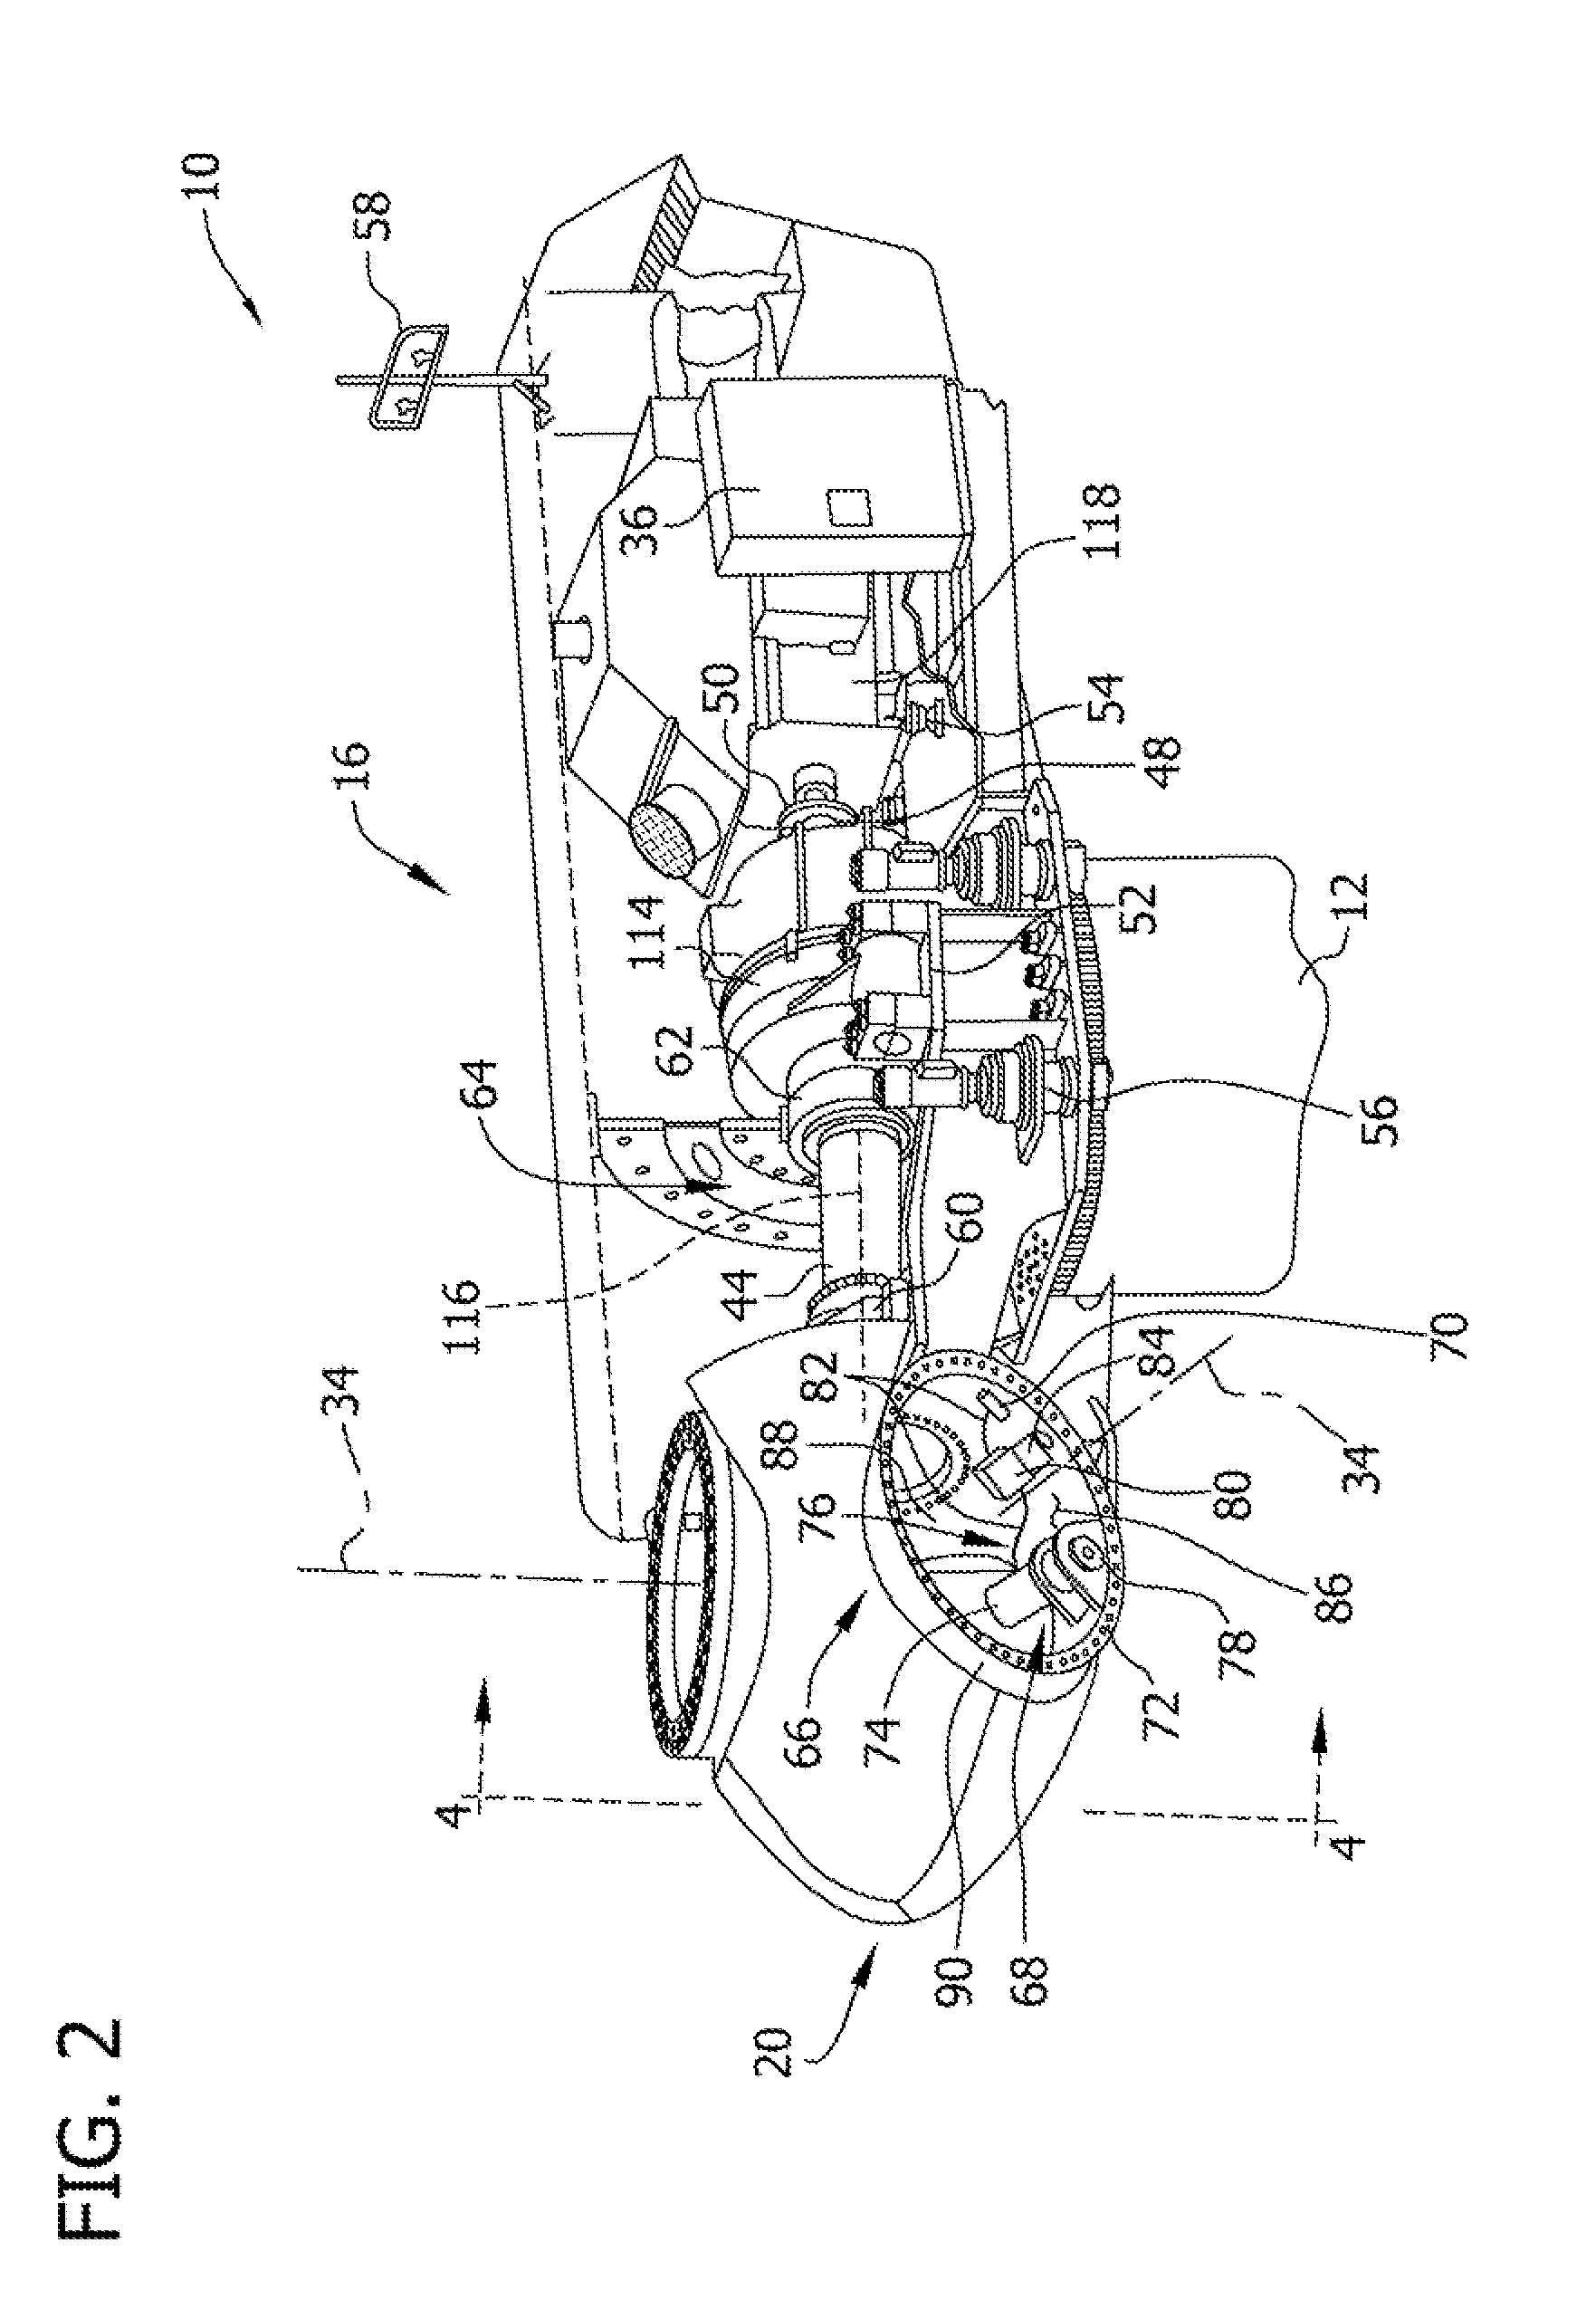 Method for preventing rotor overspeed of a wind turbine